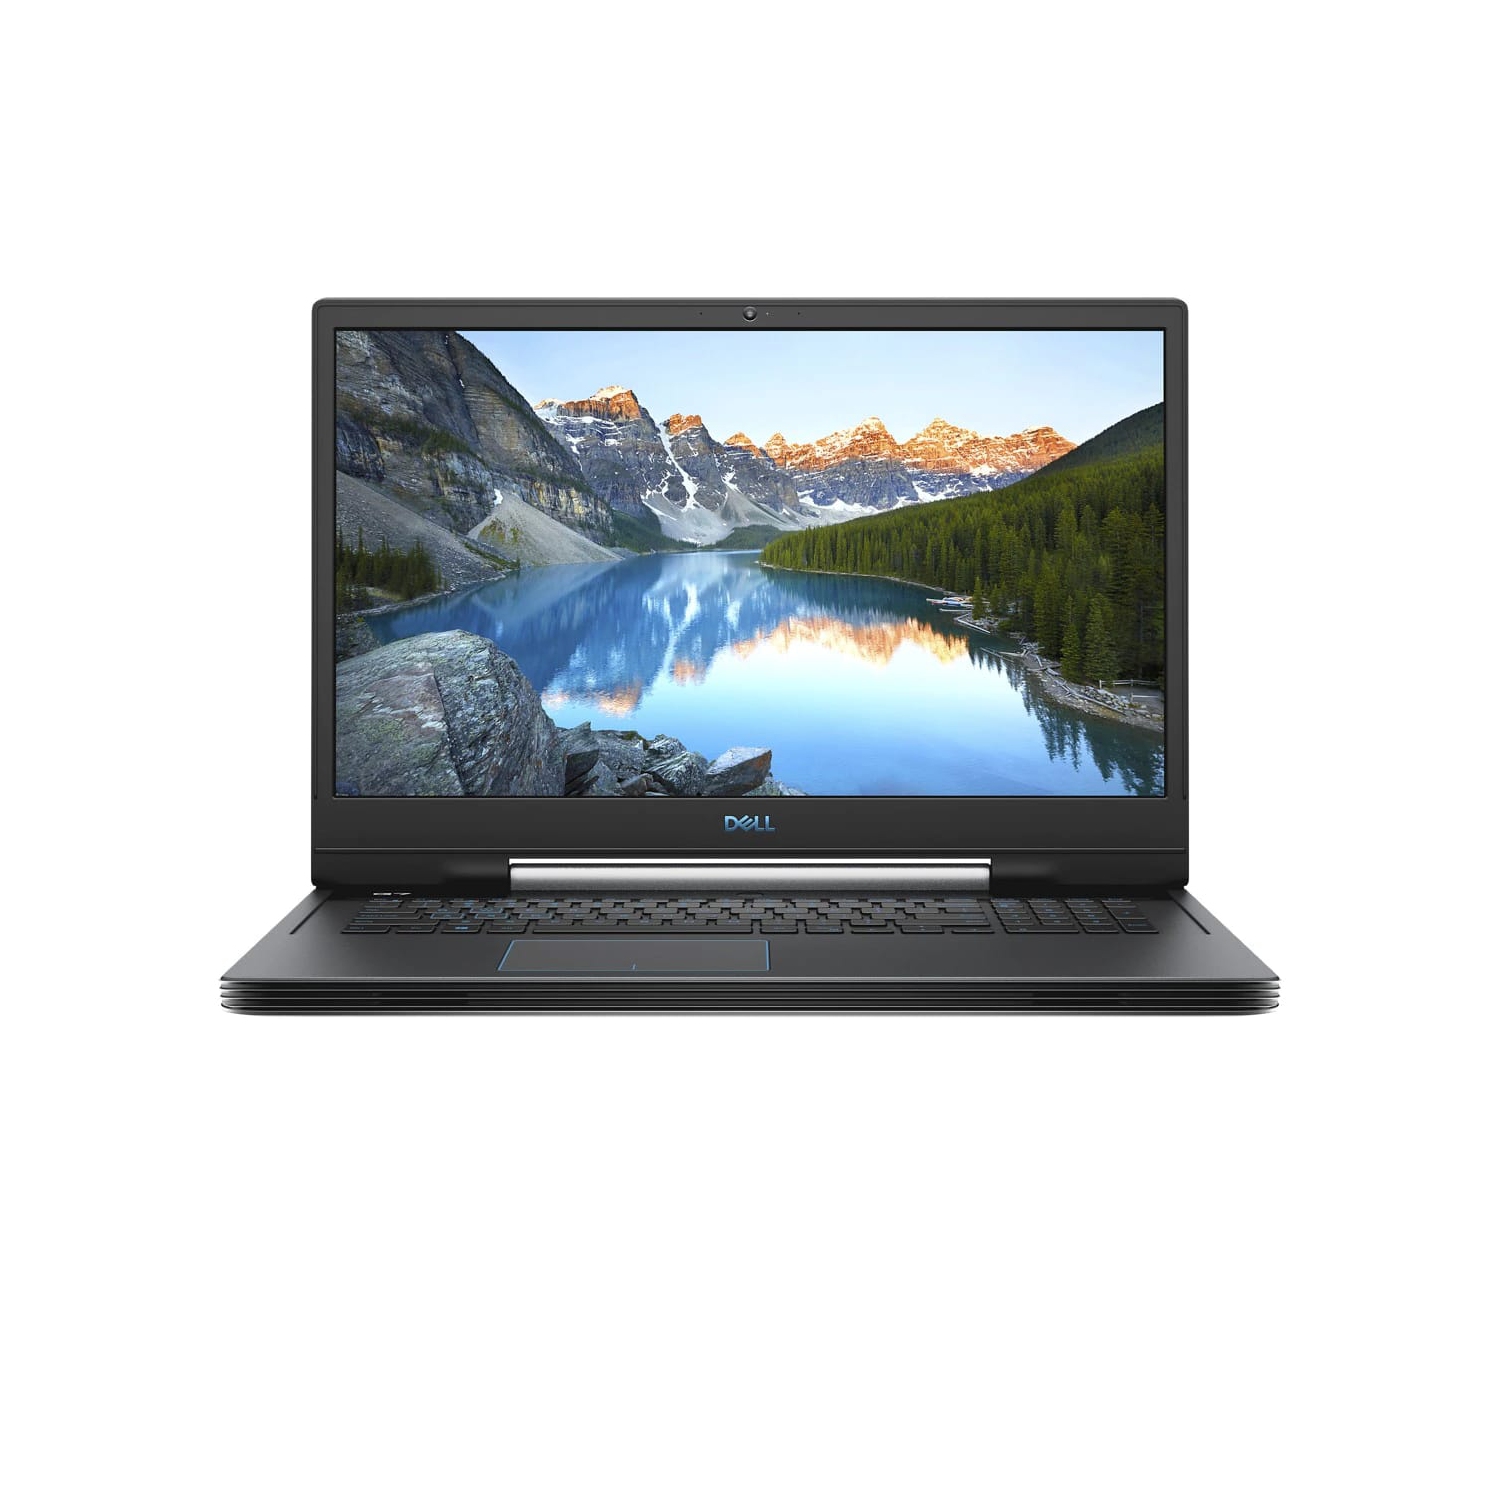 Refurbished (Excellent) – Dell G7 7790 Gaming Laptop (2019) | 17.3" FHD | Core i5 - 256GB SSD + 1TB HDD - 16GB RAM - RTX 2060 | 4 Cores @ 4.1 GHz - 6GB GDDR6